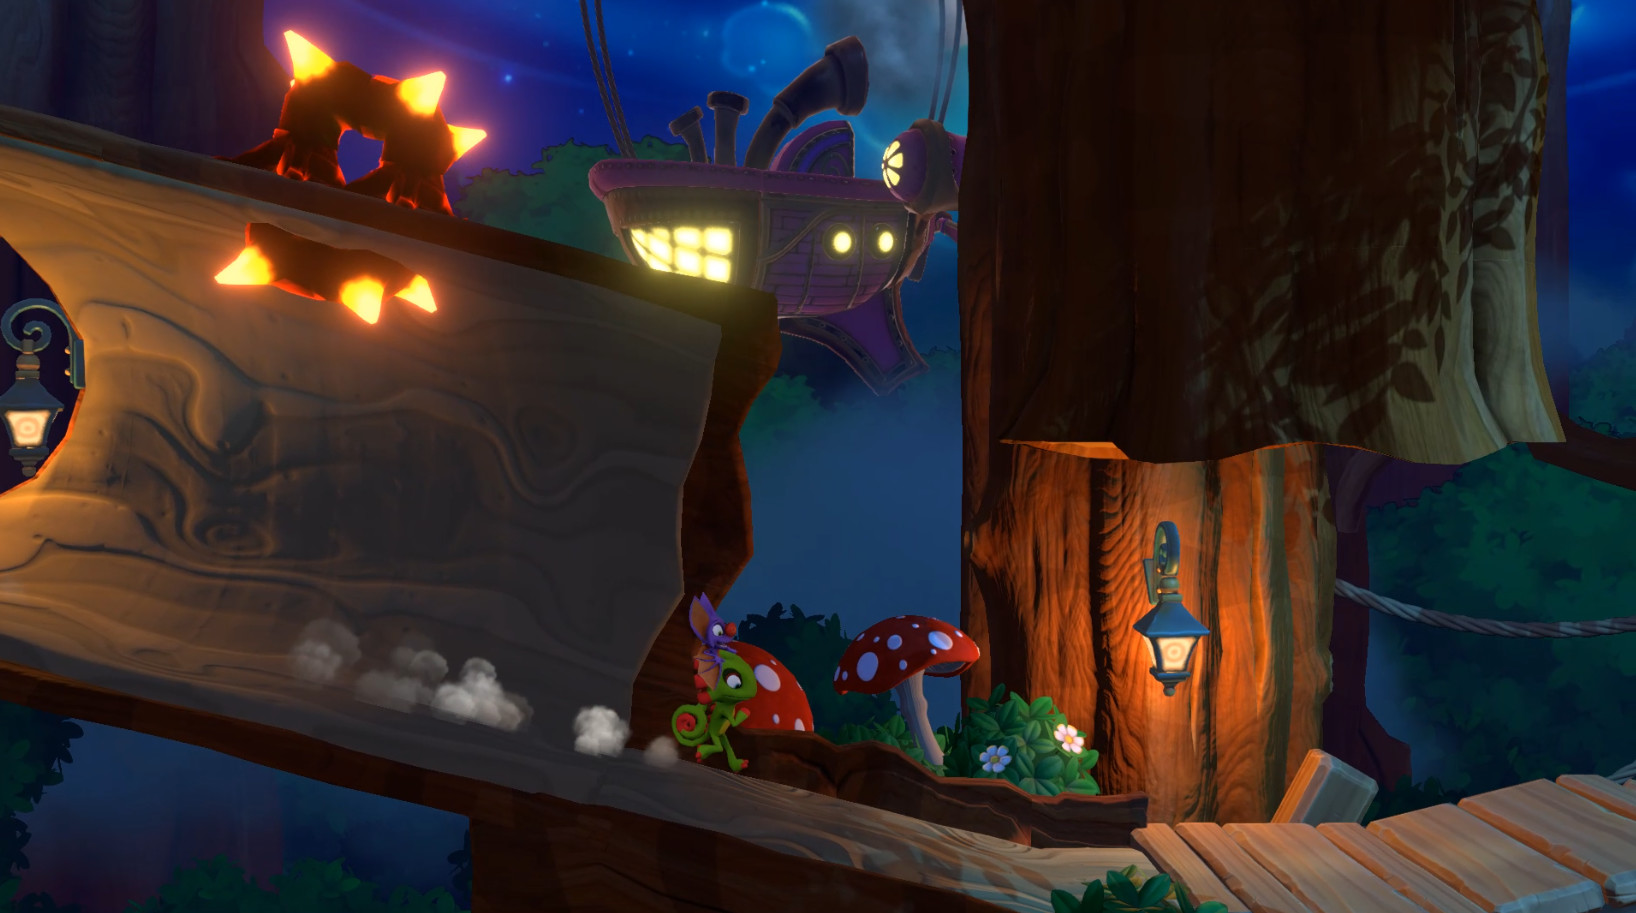 Yooka-Laylee and the Impossible Lair on Steam